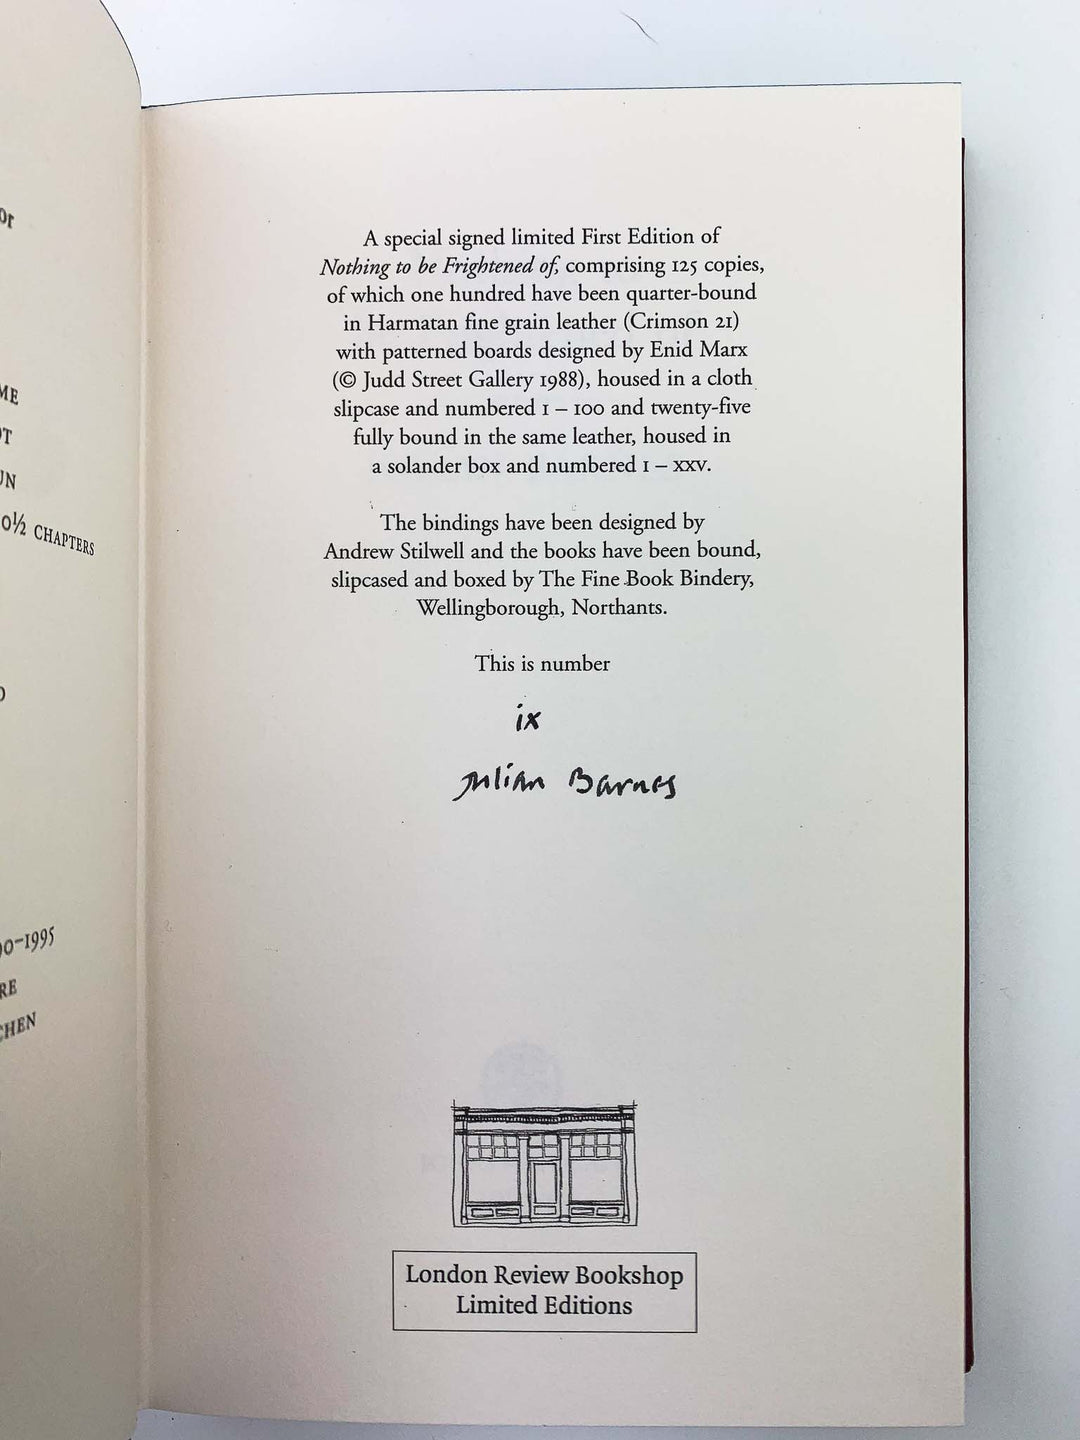 Barnes, Julian - Nothing to Be Frightened of - one of 25 copies - SIGNED | book detail 5